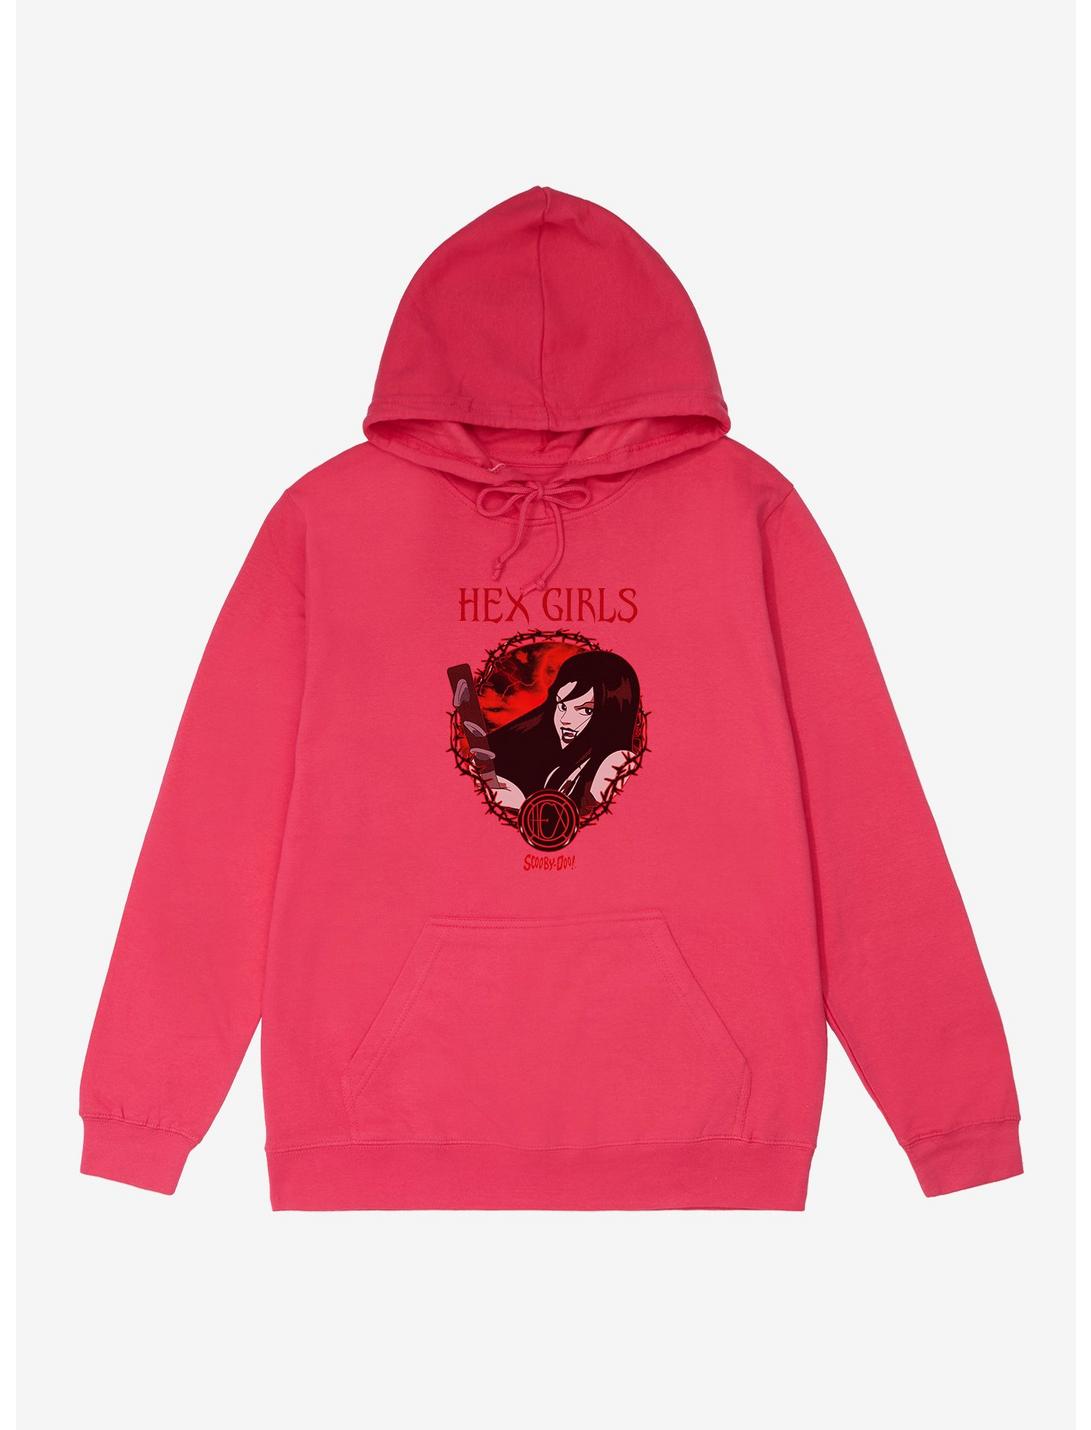 Scooby-Doo Hex Girls Thorn French Terry Hoodie, HELICONIA HEATHER, hi-res